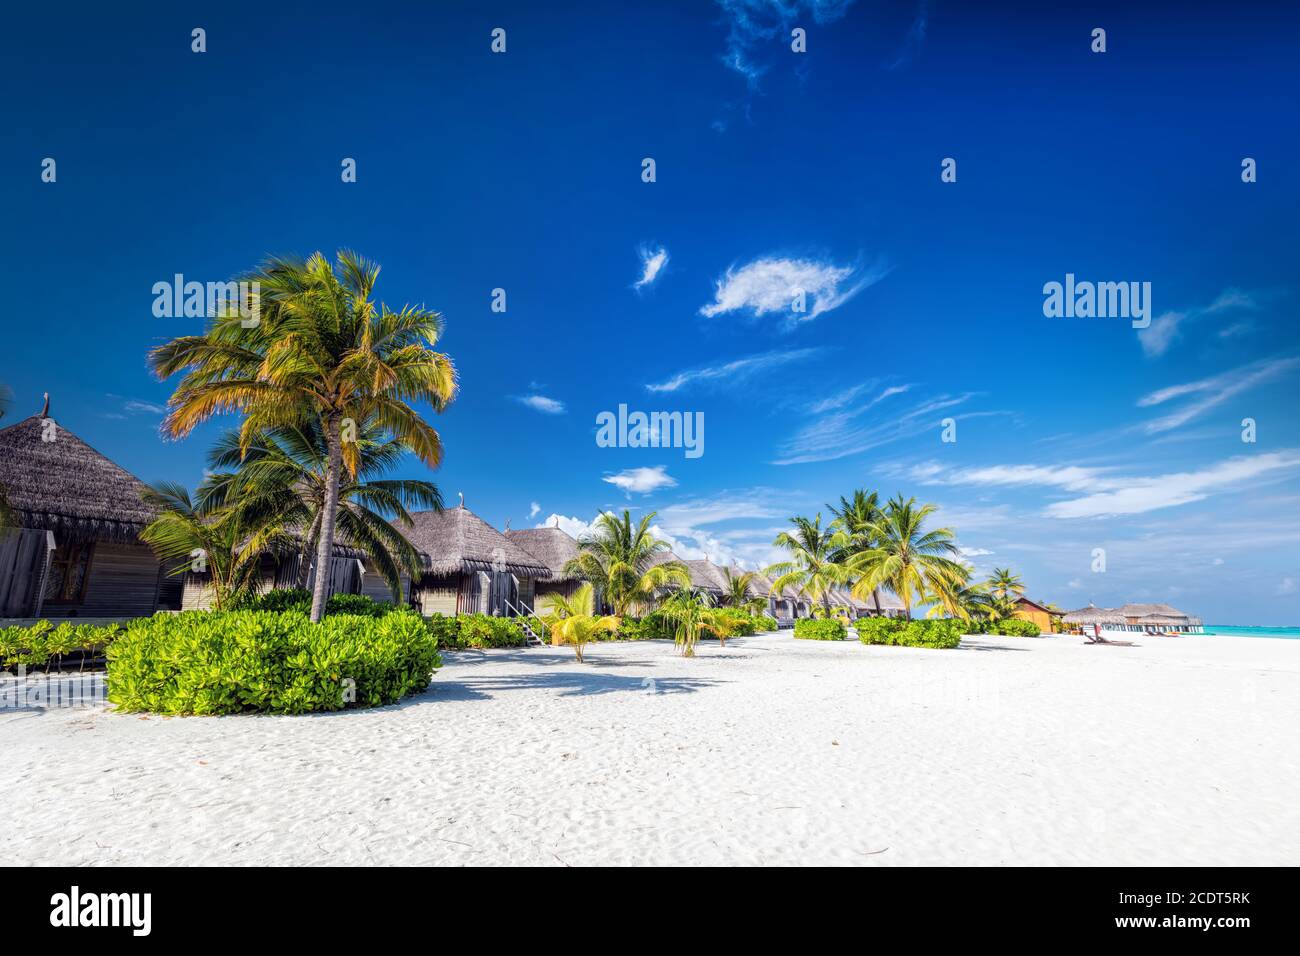 Beach with coconut palms and villas on a small island resort in Maldives Stock Photo